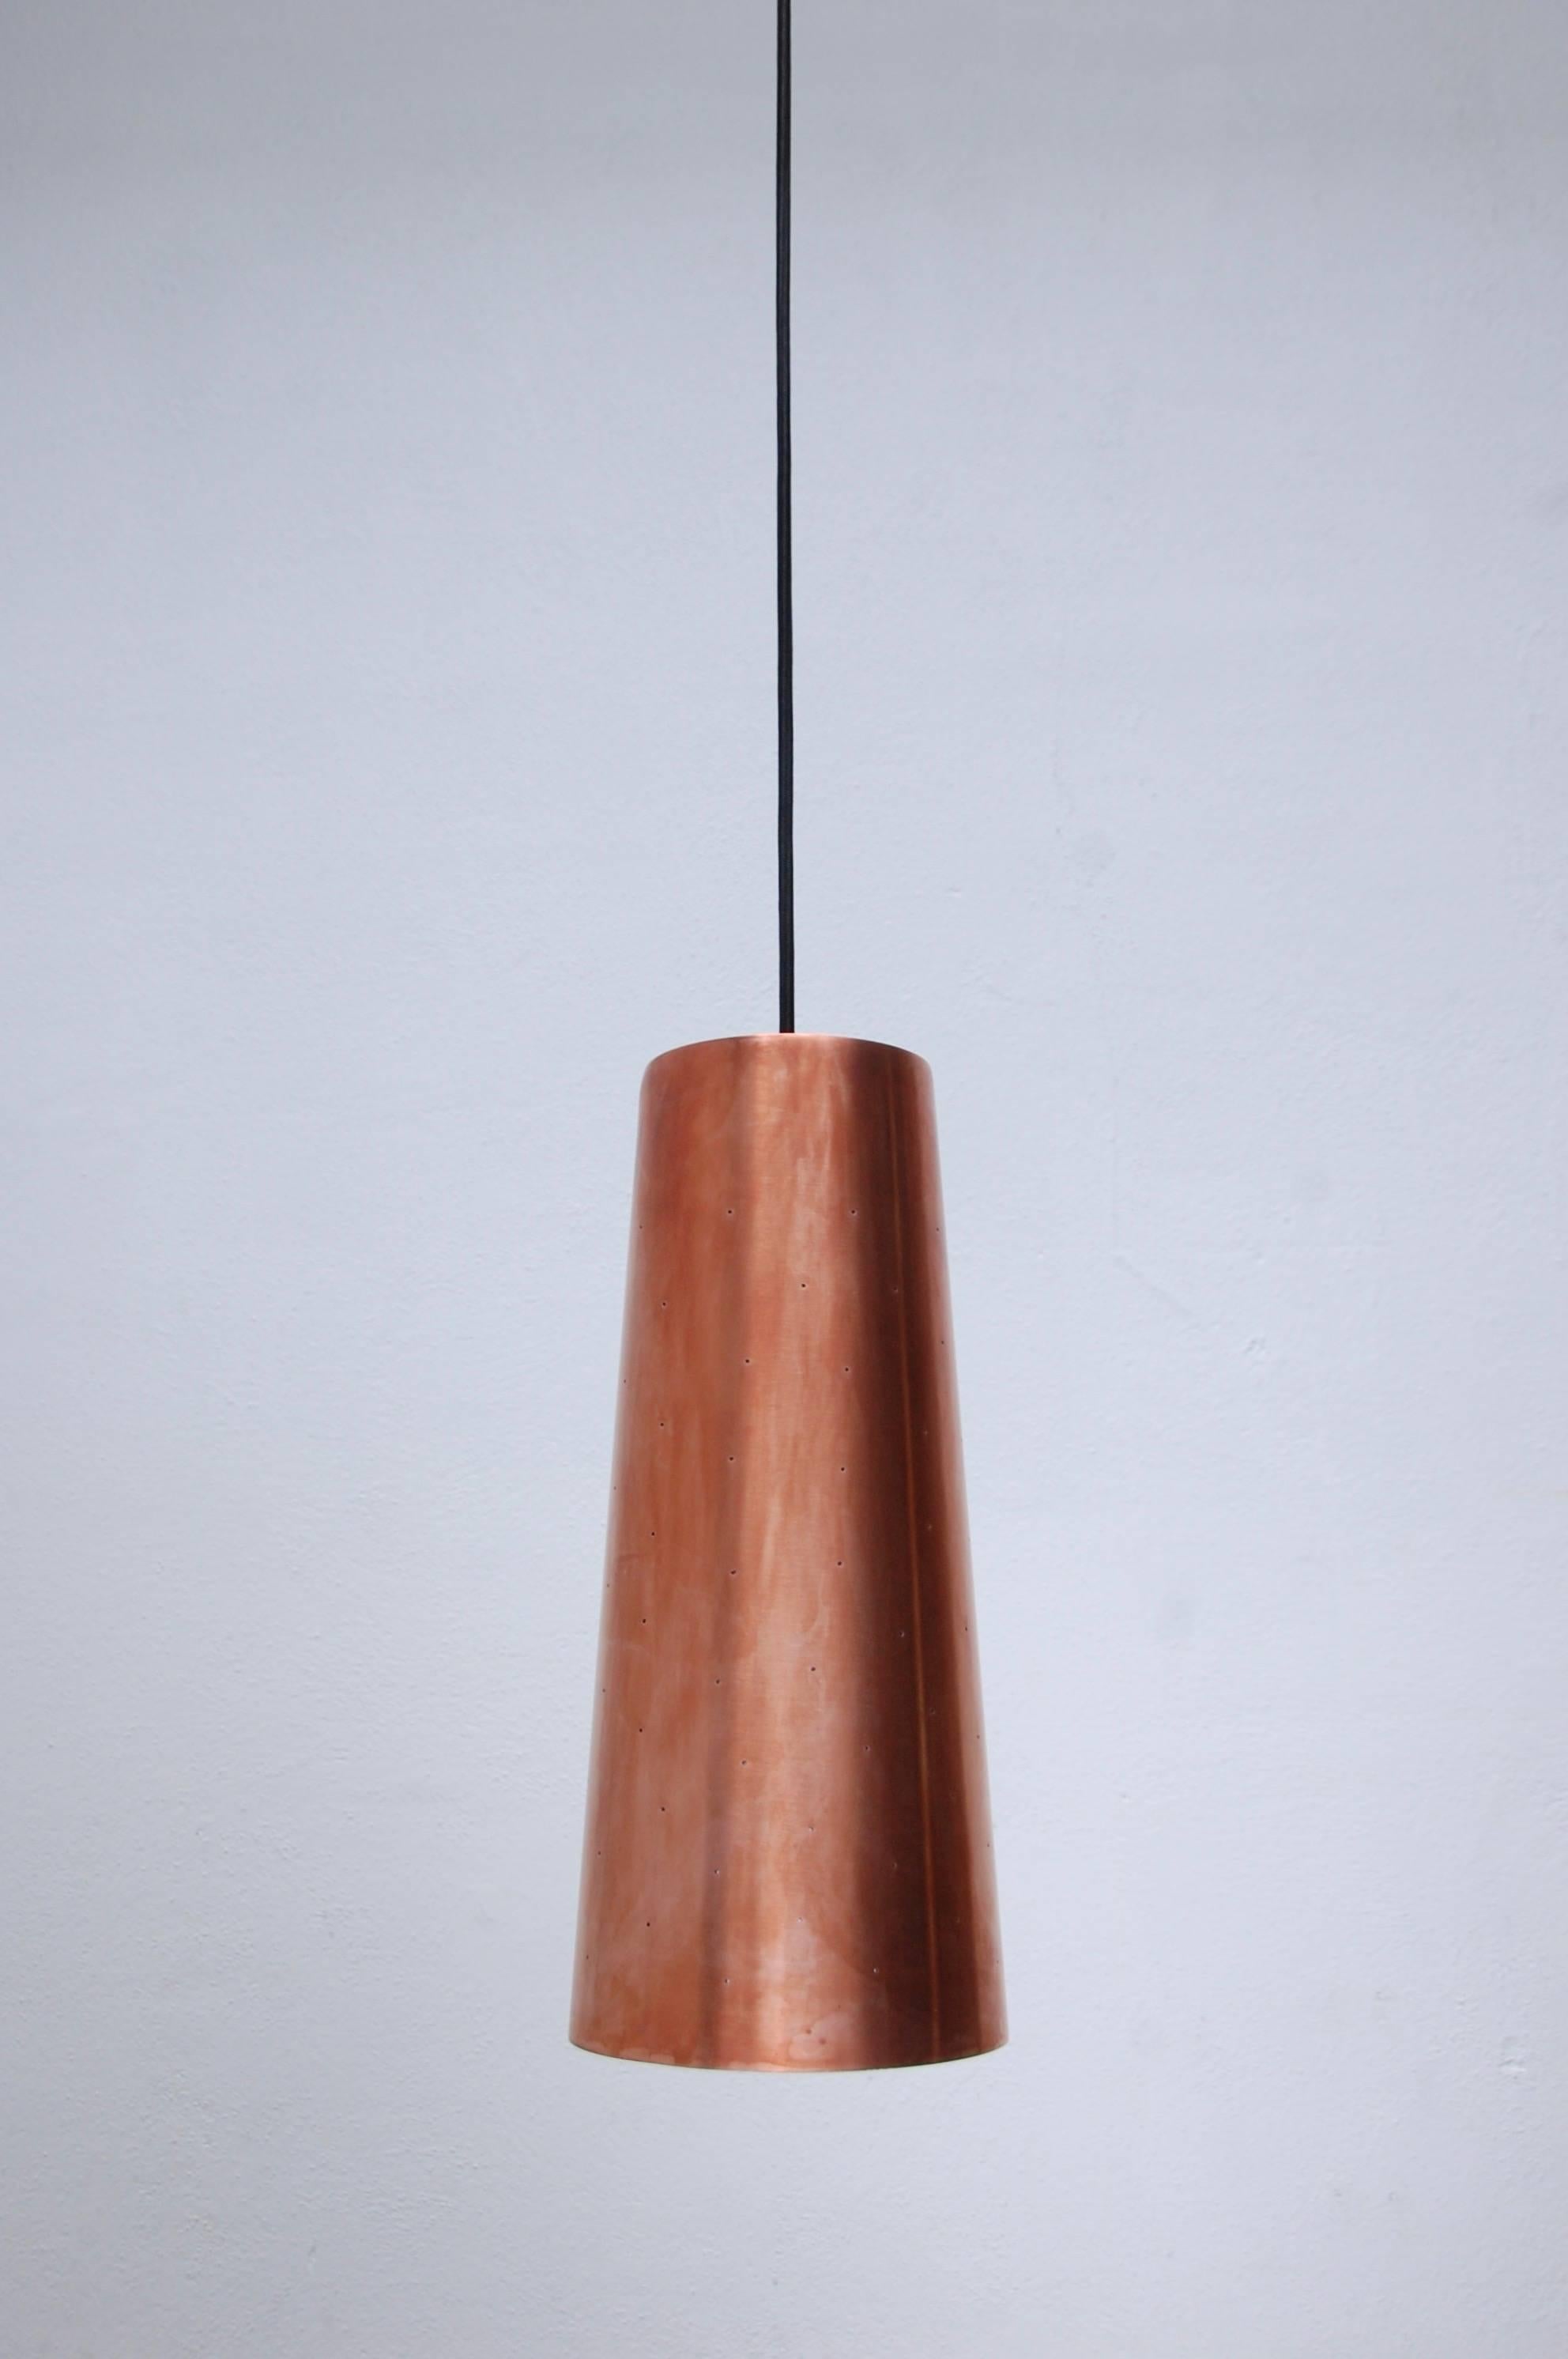 Fabulous large LUrco copper pendant with perforations. Made of solid copper. Interior is an off white painted finish and the exterior is un-lacquered patinated copper. Has a single medium based socket 100 watts maximum. OAD adjustable on site.